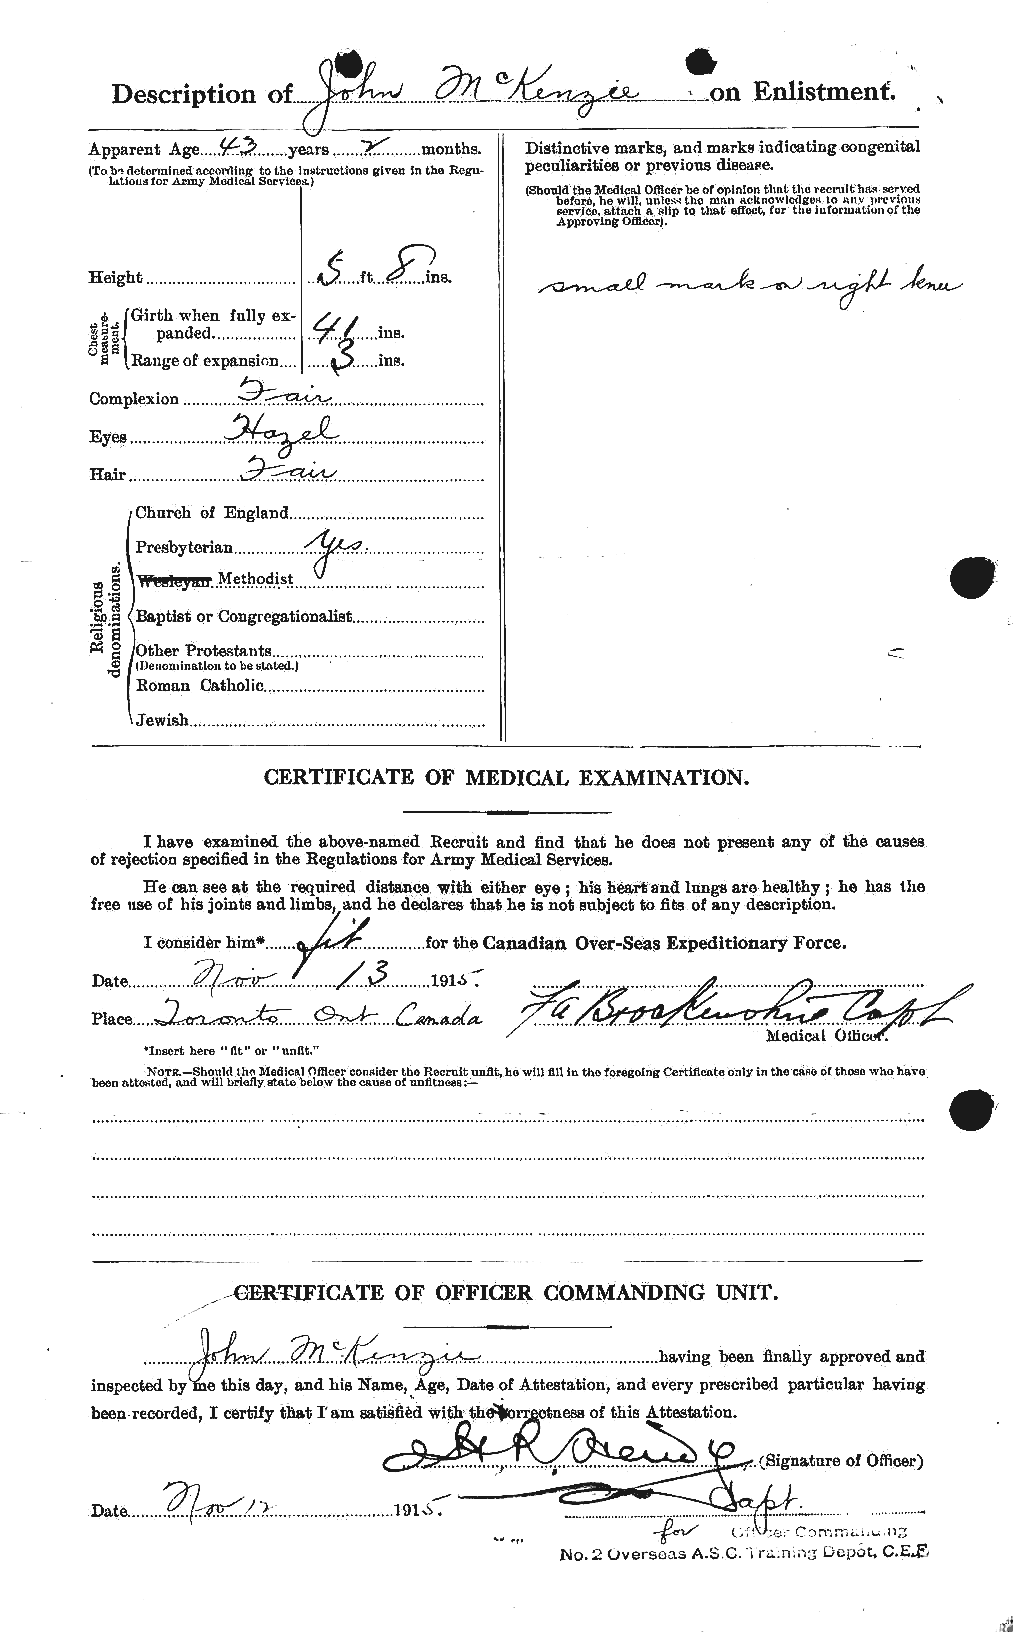 Personnel Records of the First World War - CEF 529310b